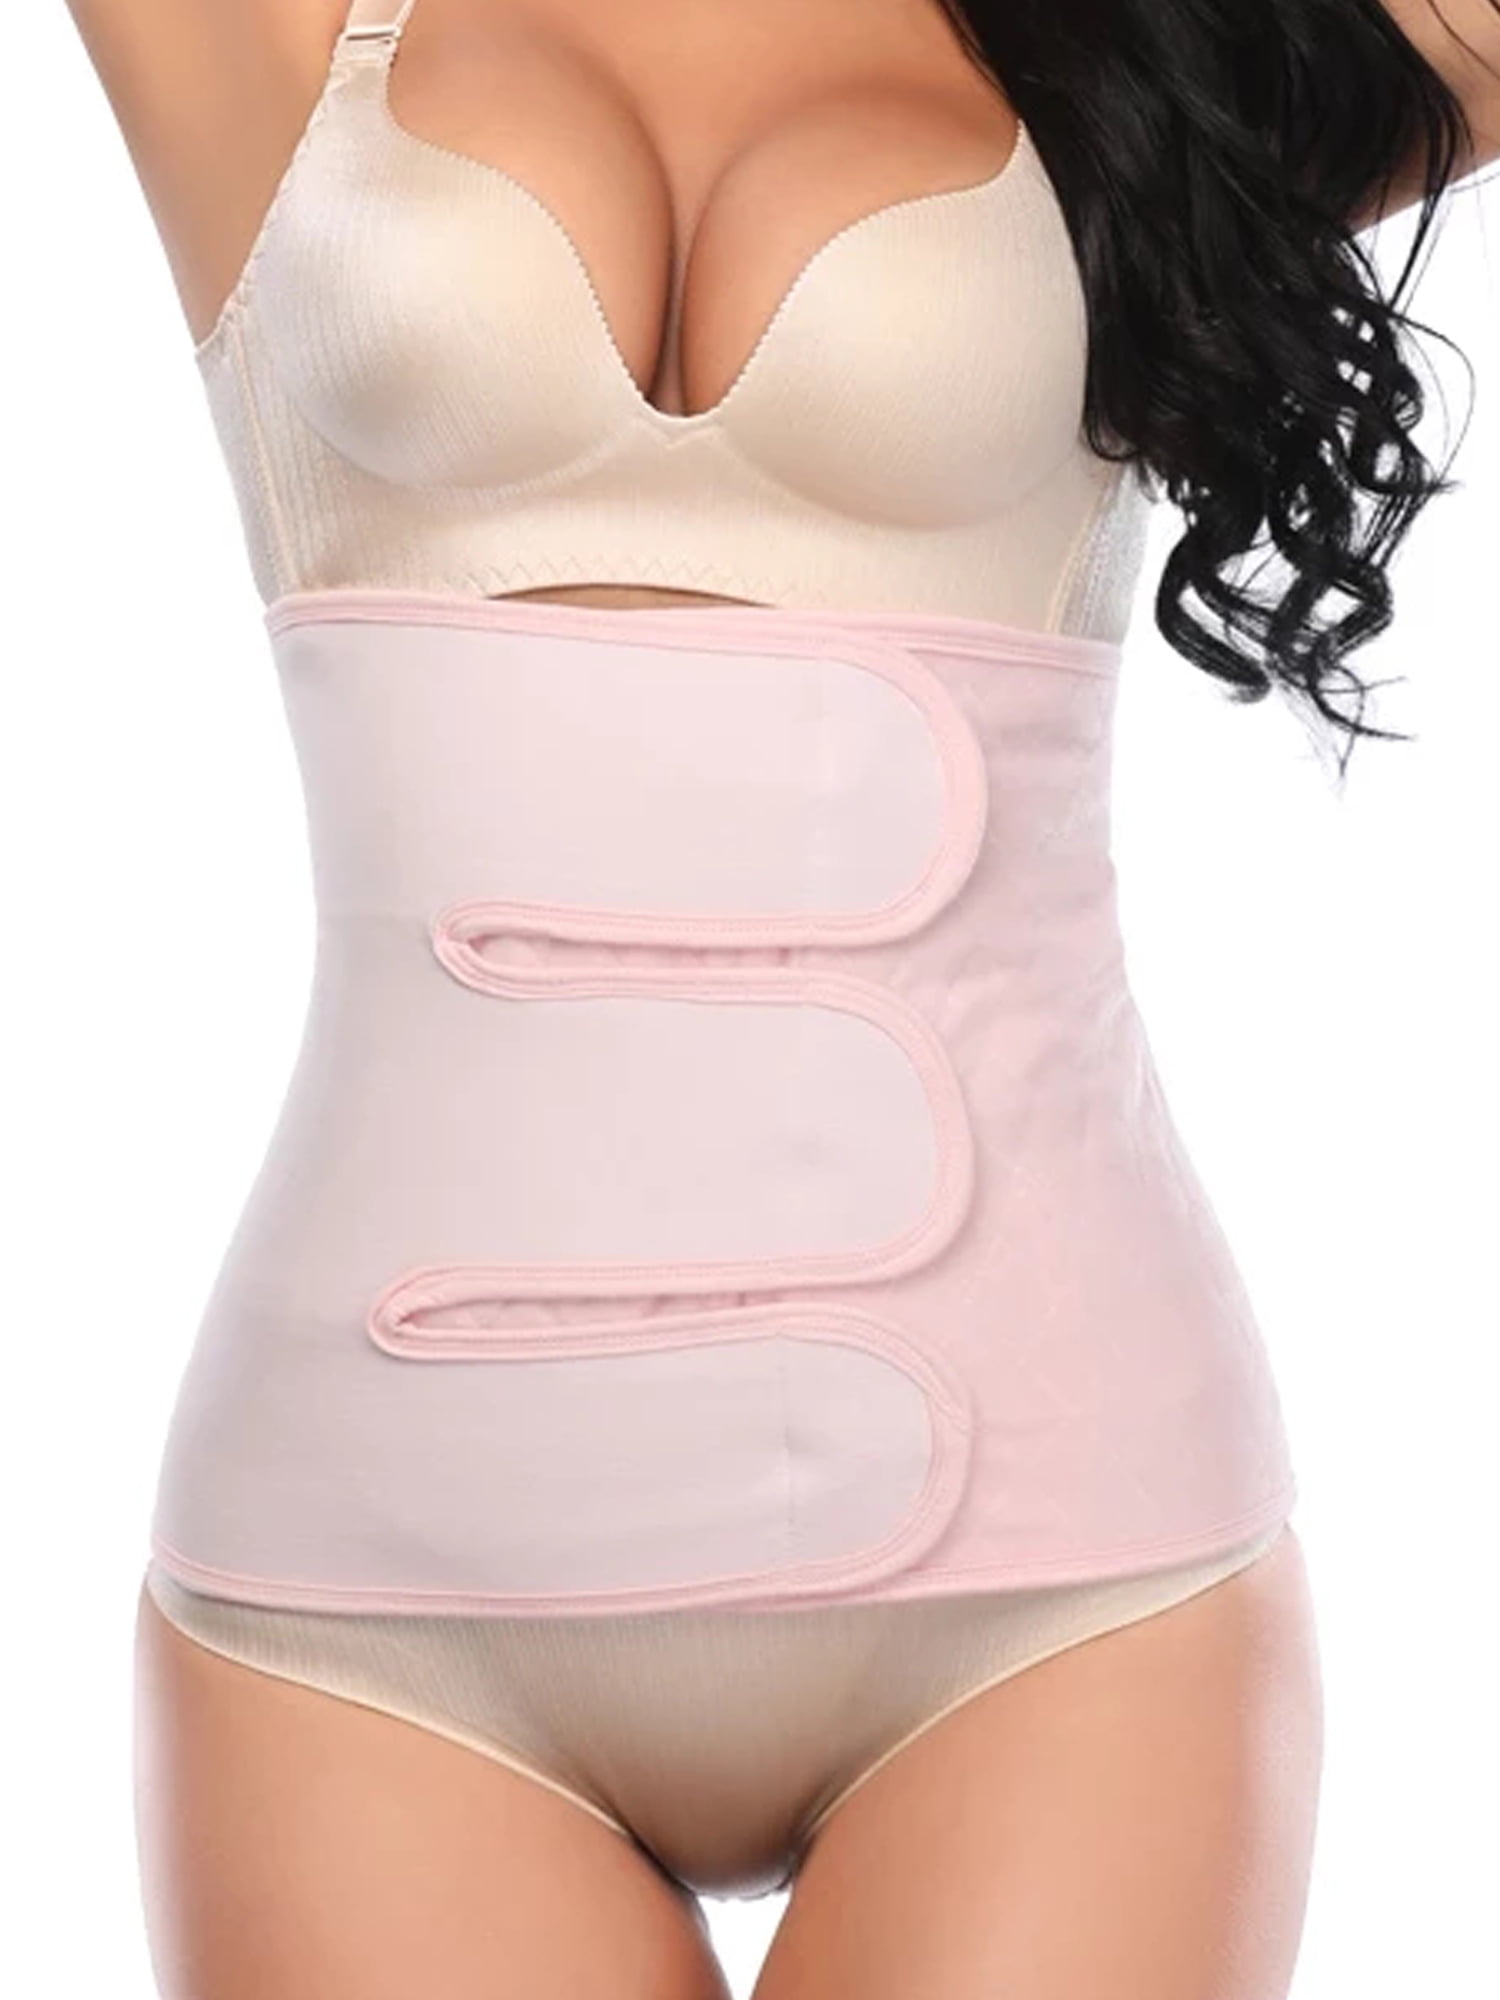 SHAPERIN Postpartum Girdle C-Section Recovery Belt Back Support